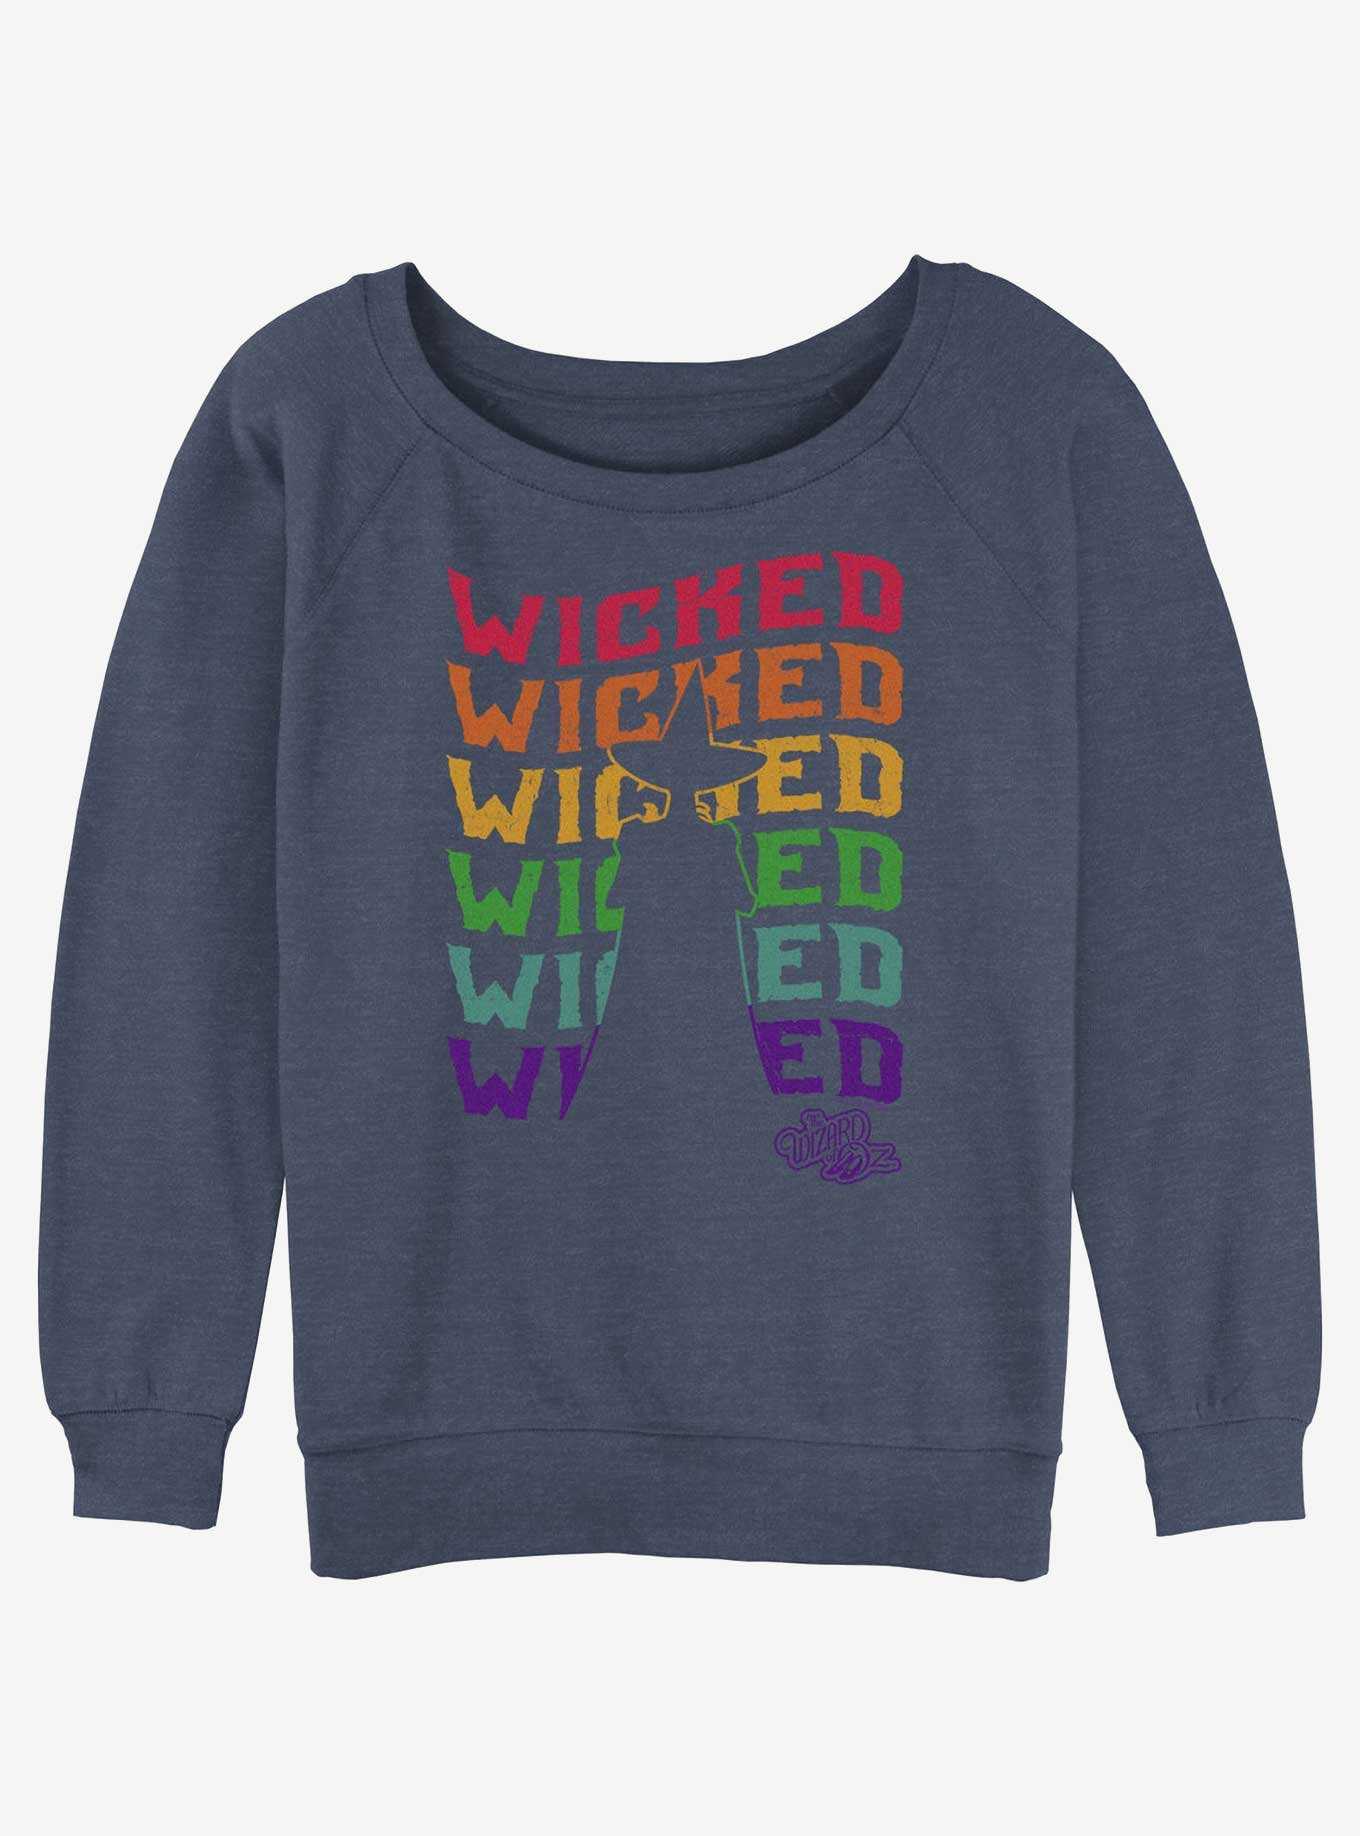 The Wizard Of Oz WB Wavy Wicked Silhouette Girls Slouchy Sweatshirt, , hi-res